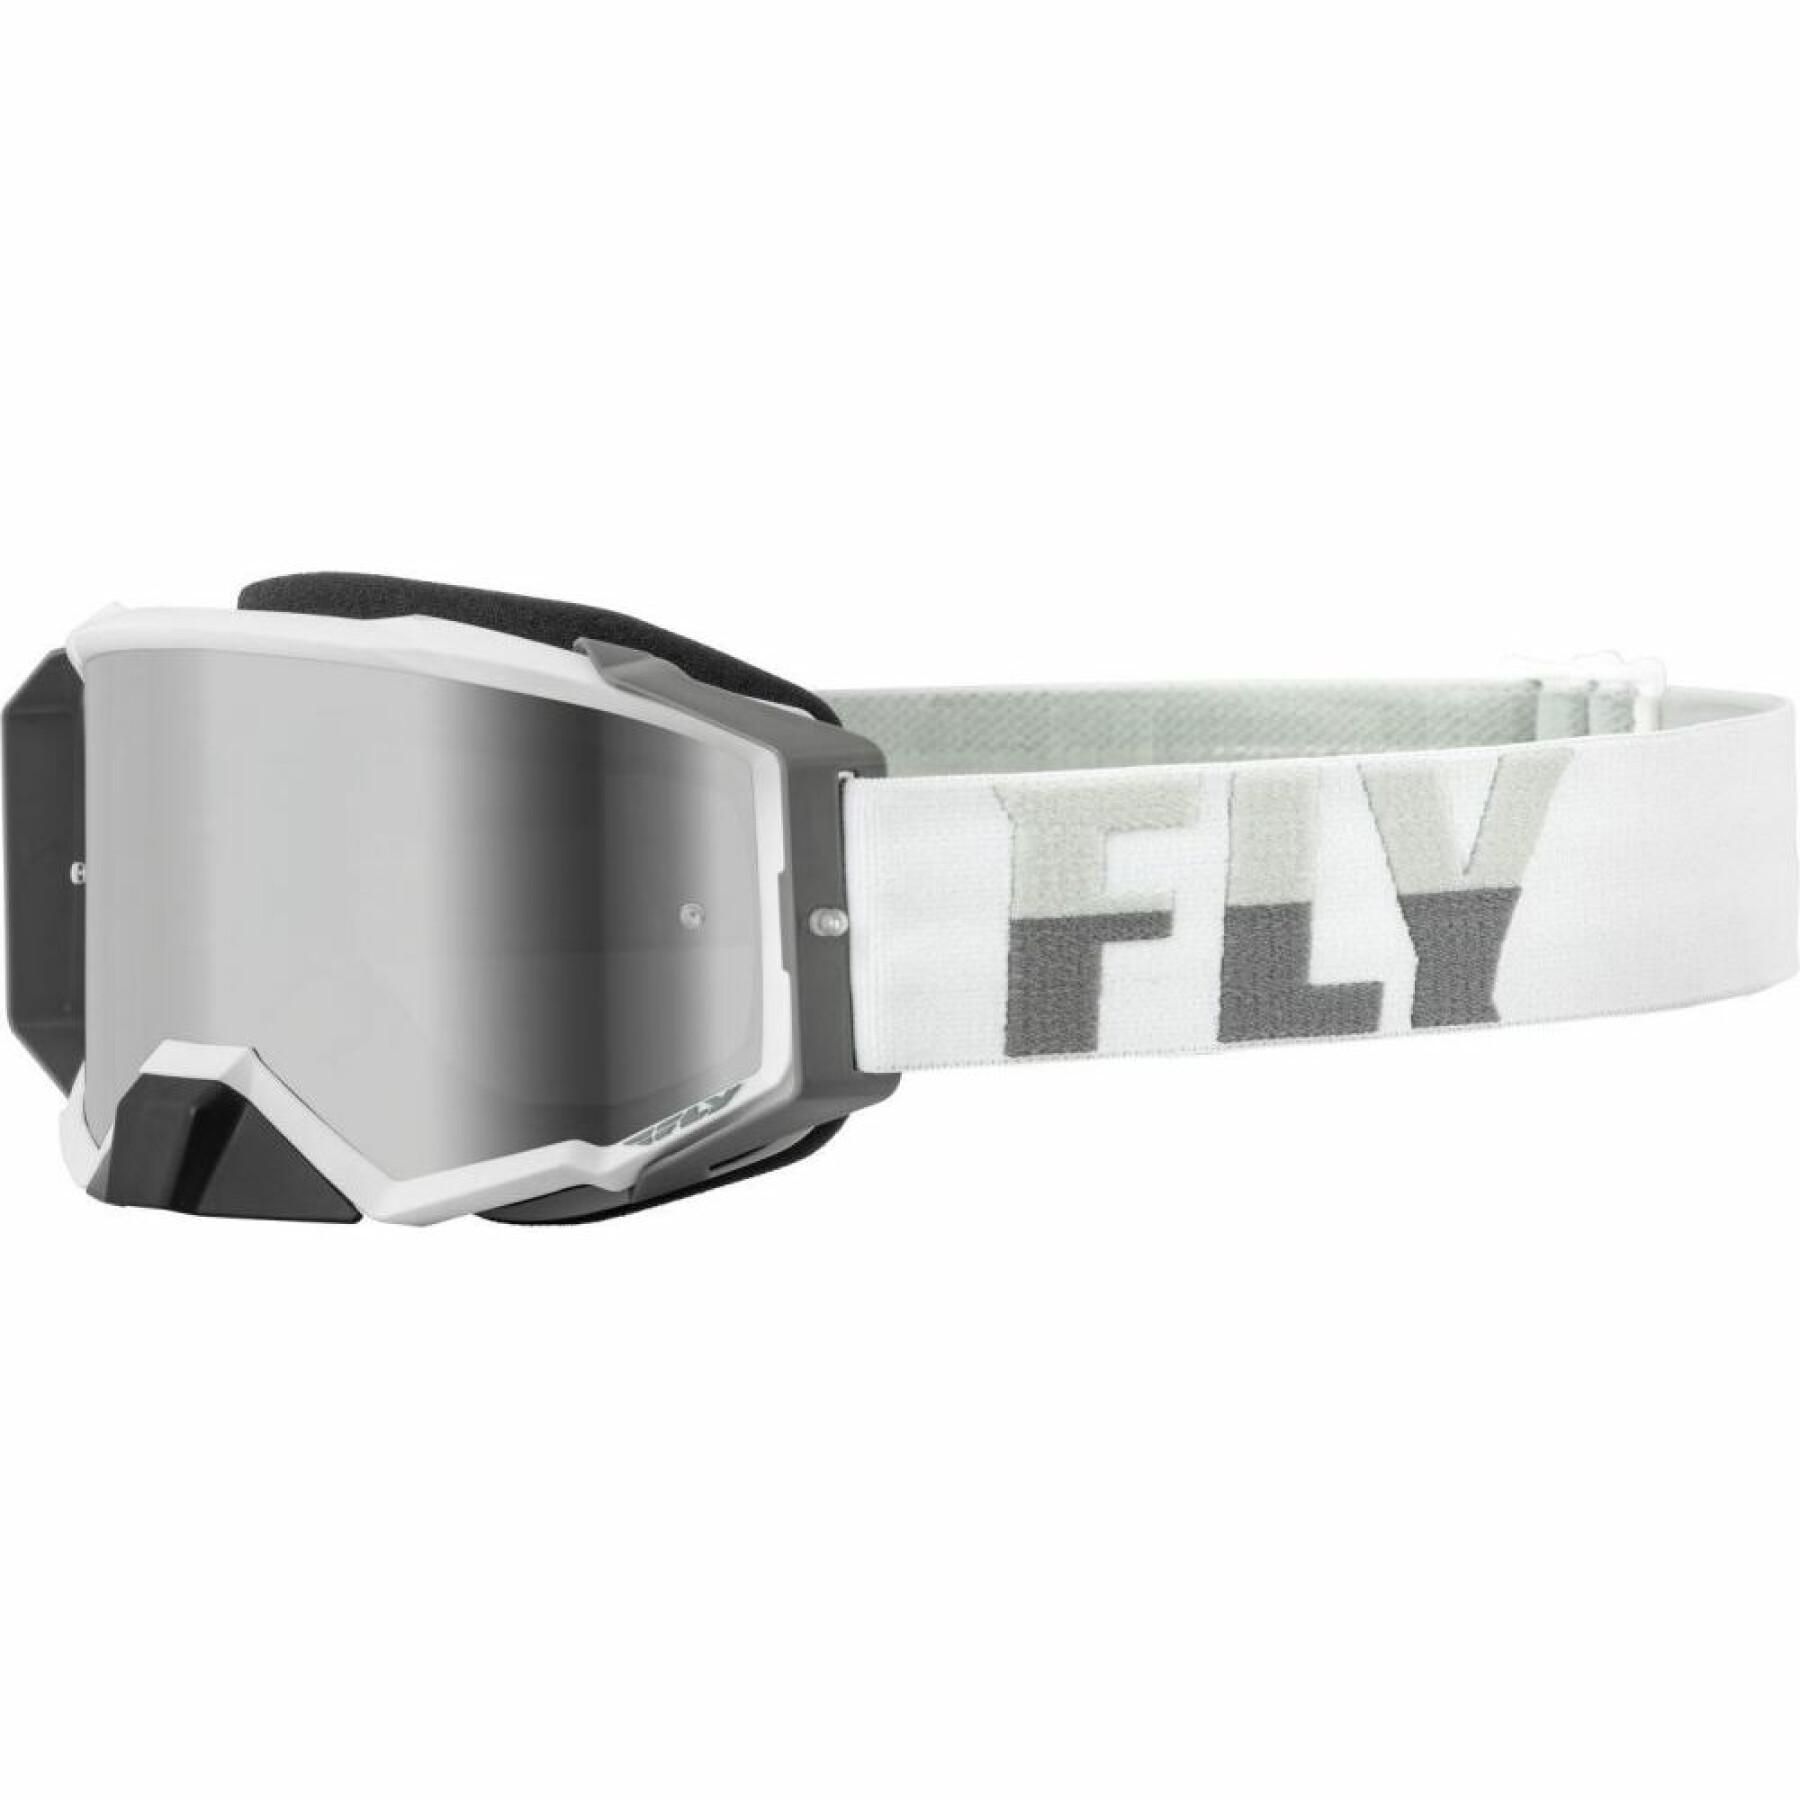 Mask Fly Racing Zone Pro